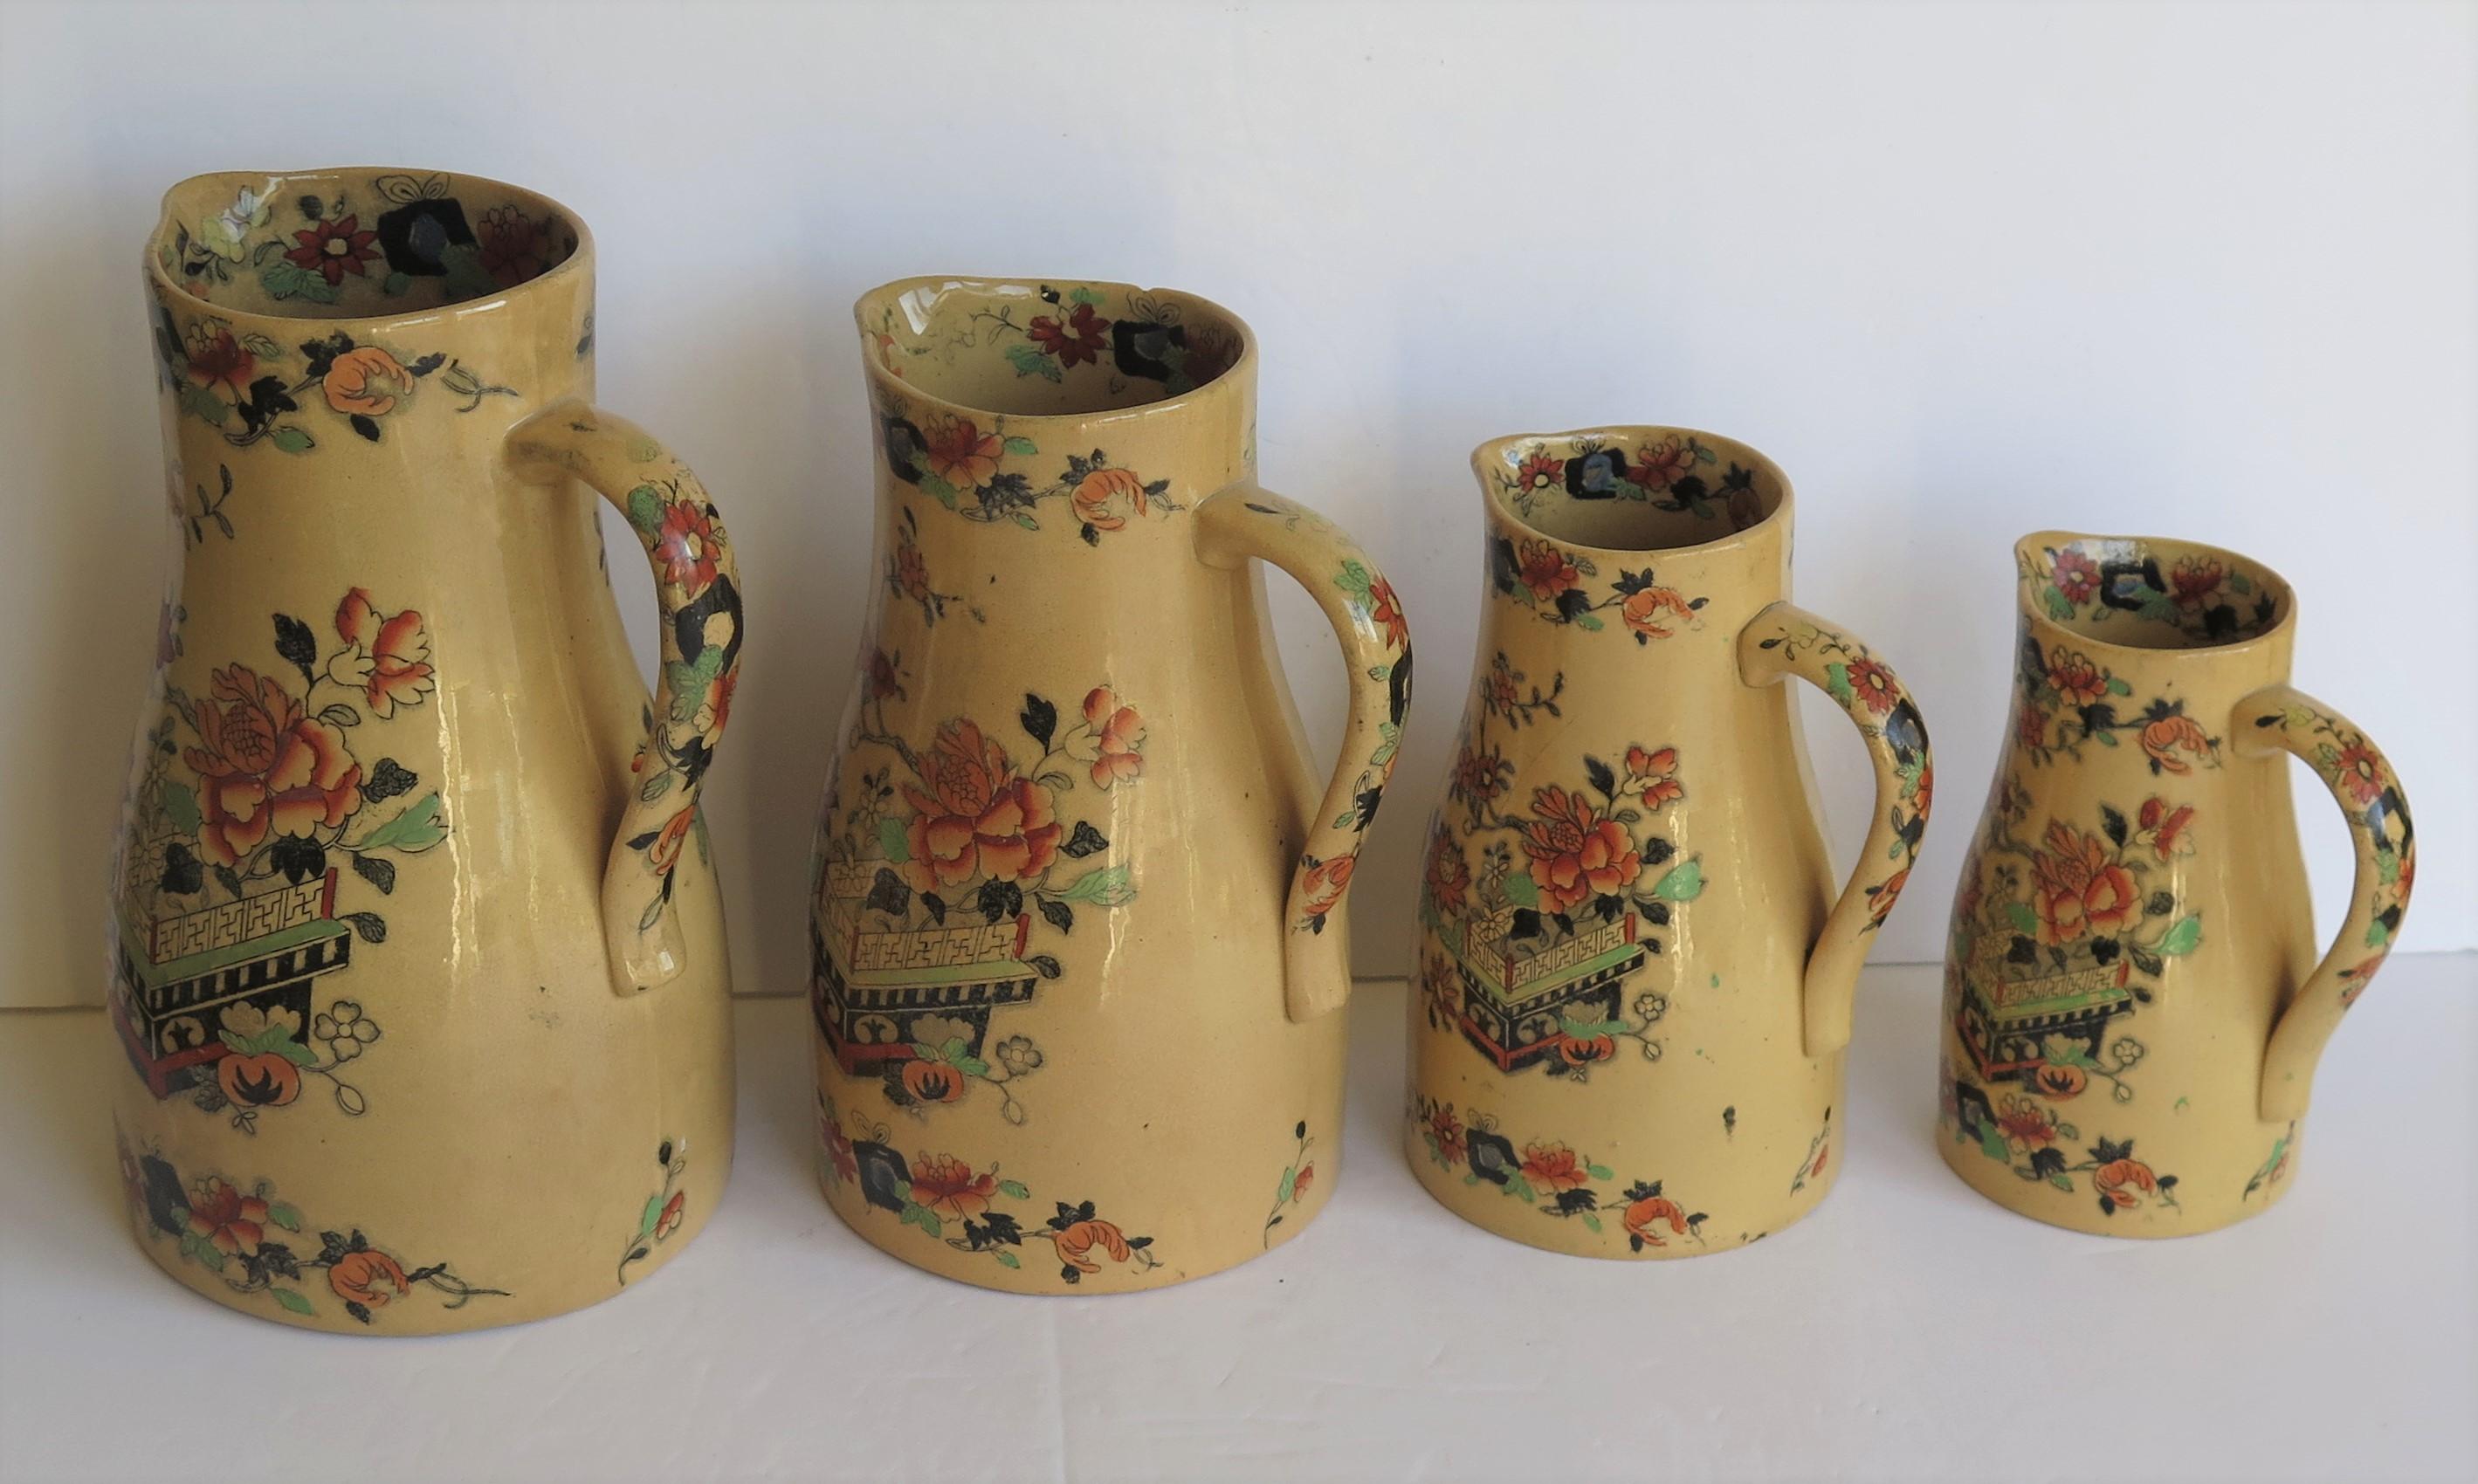 This is a very rare set of four graduated jugs or pitchers by Mason's Ironstone pottery in the flower box pattern all dating to the mid-19th century, circa 1830-1851 Victorian period.

The jugs are all potted in one of Mason's Classic Jug shapes